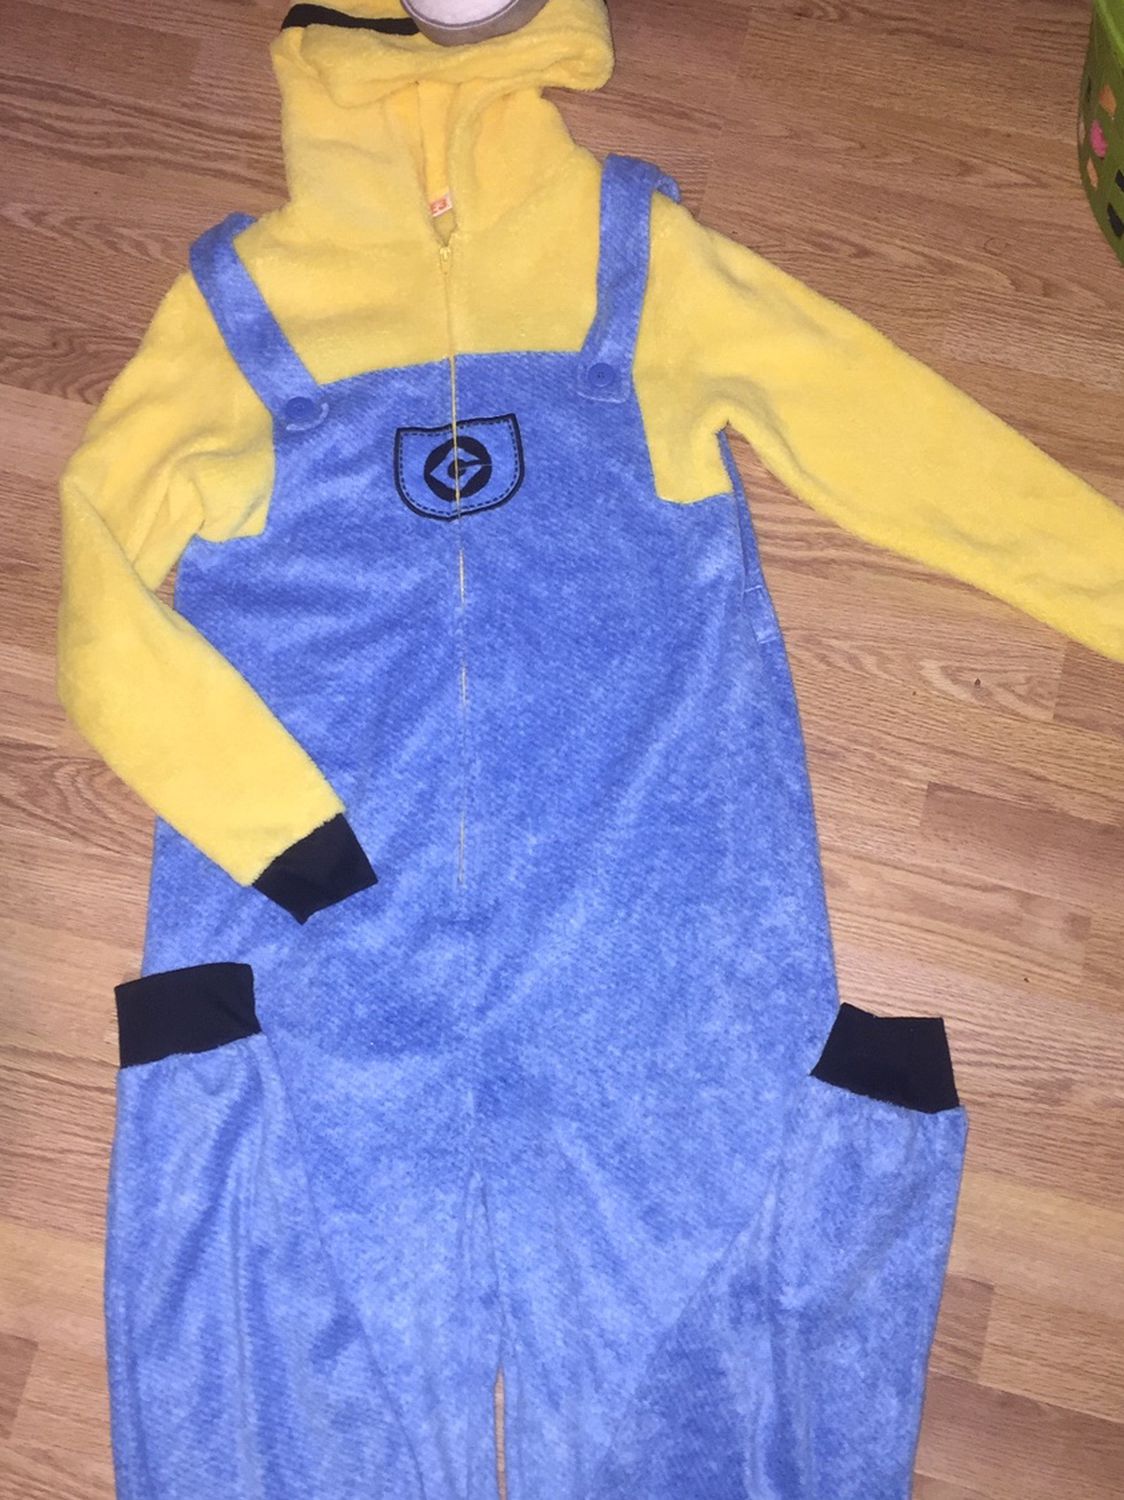 Despicable me Minion onesie Adult Xs Perfect for Halloween 